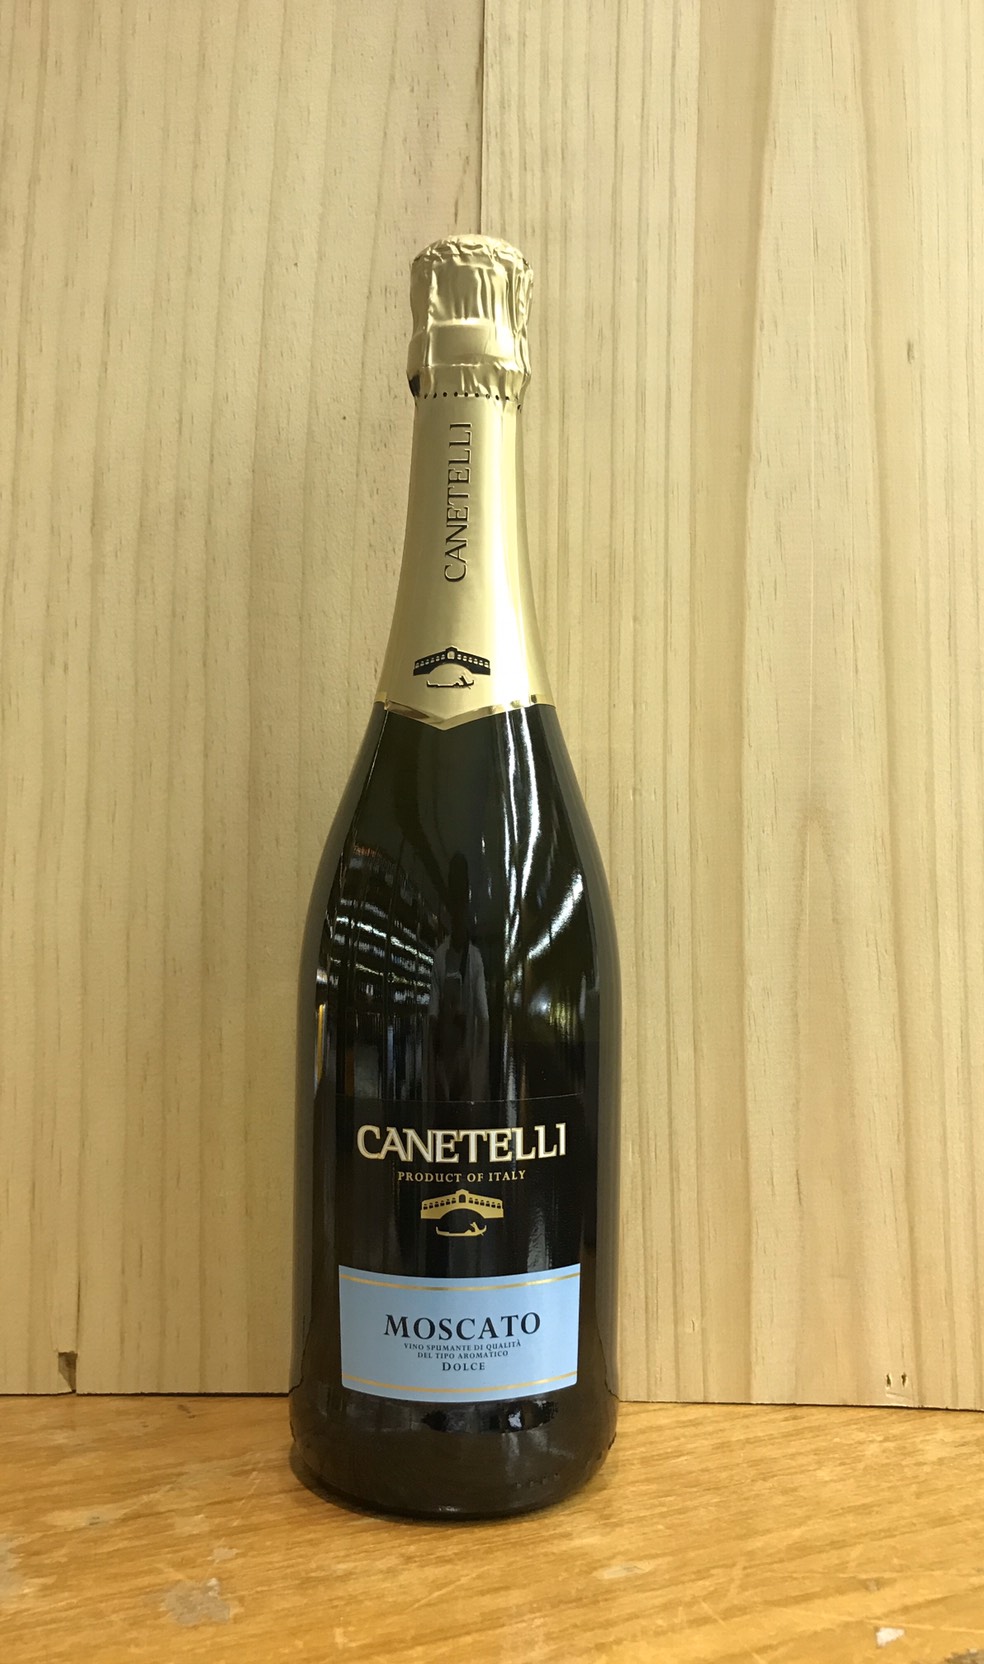 Canetelli Moscato Dolce